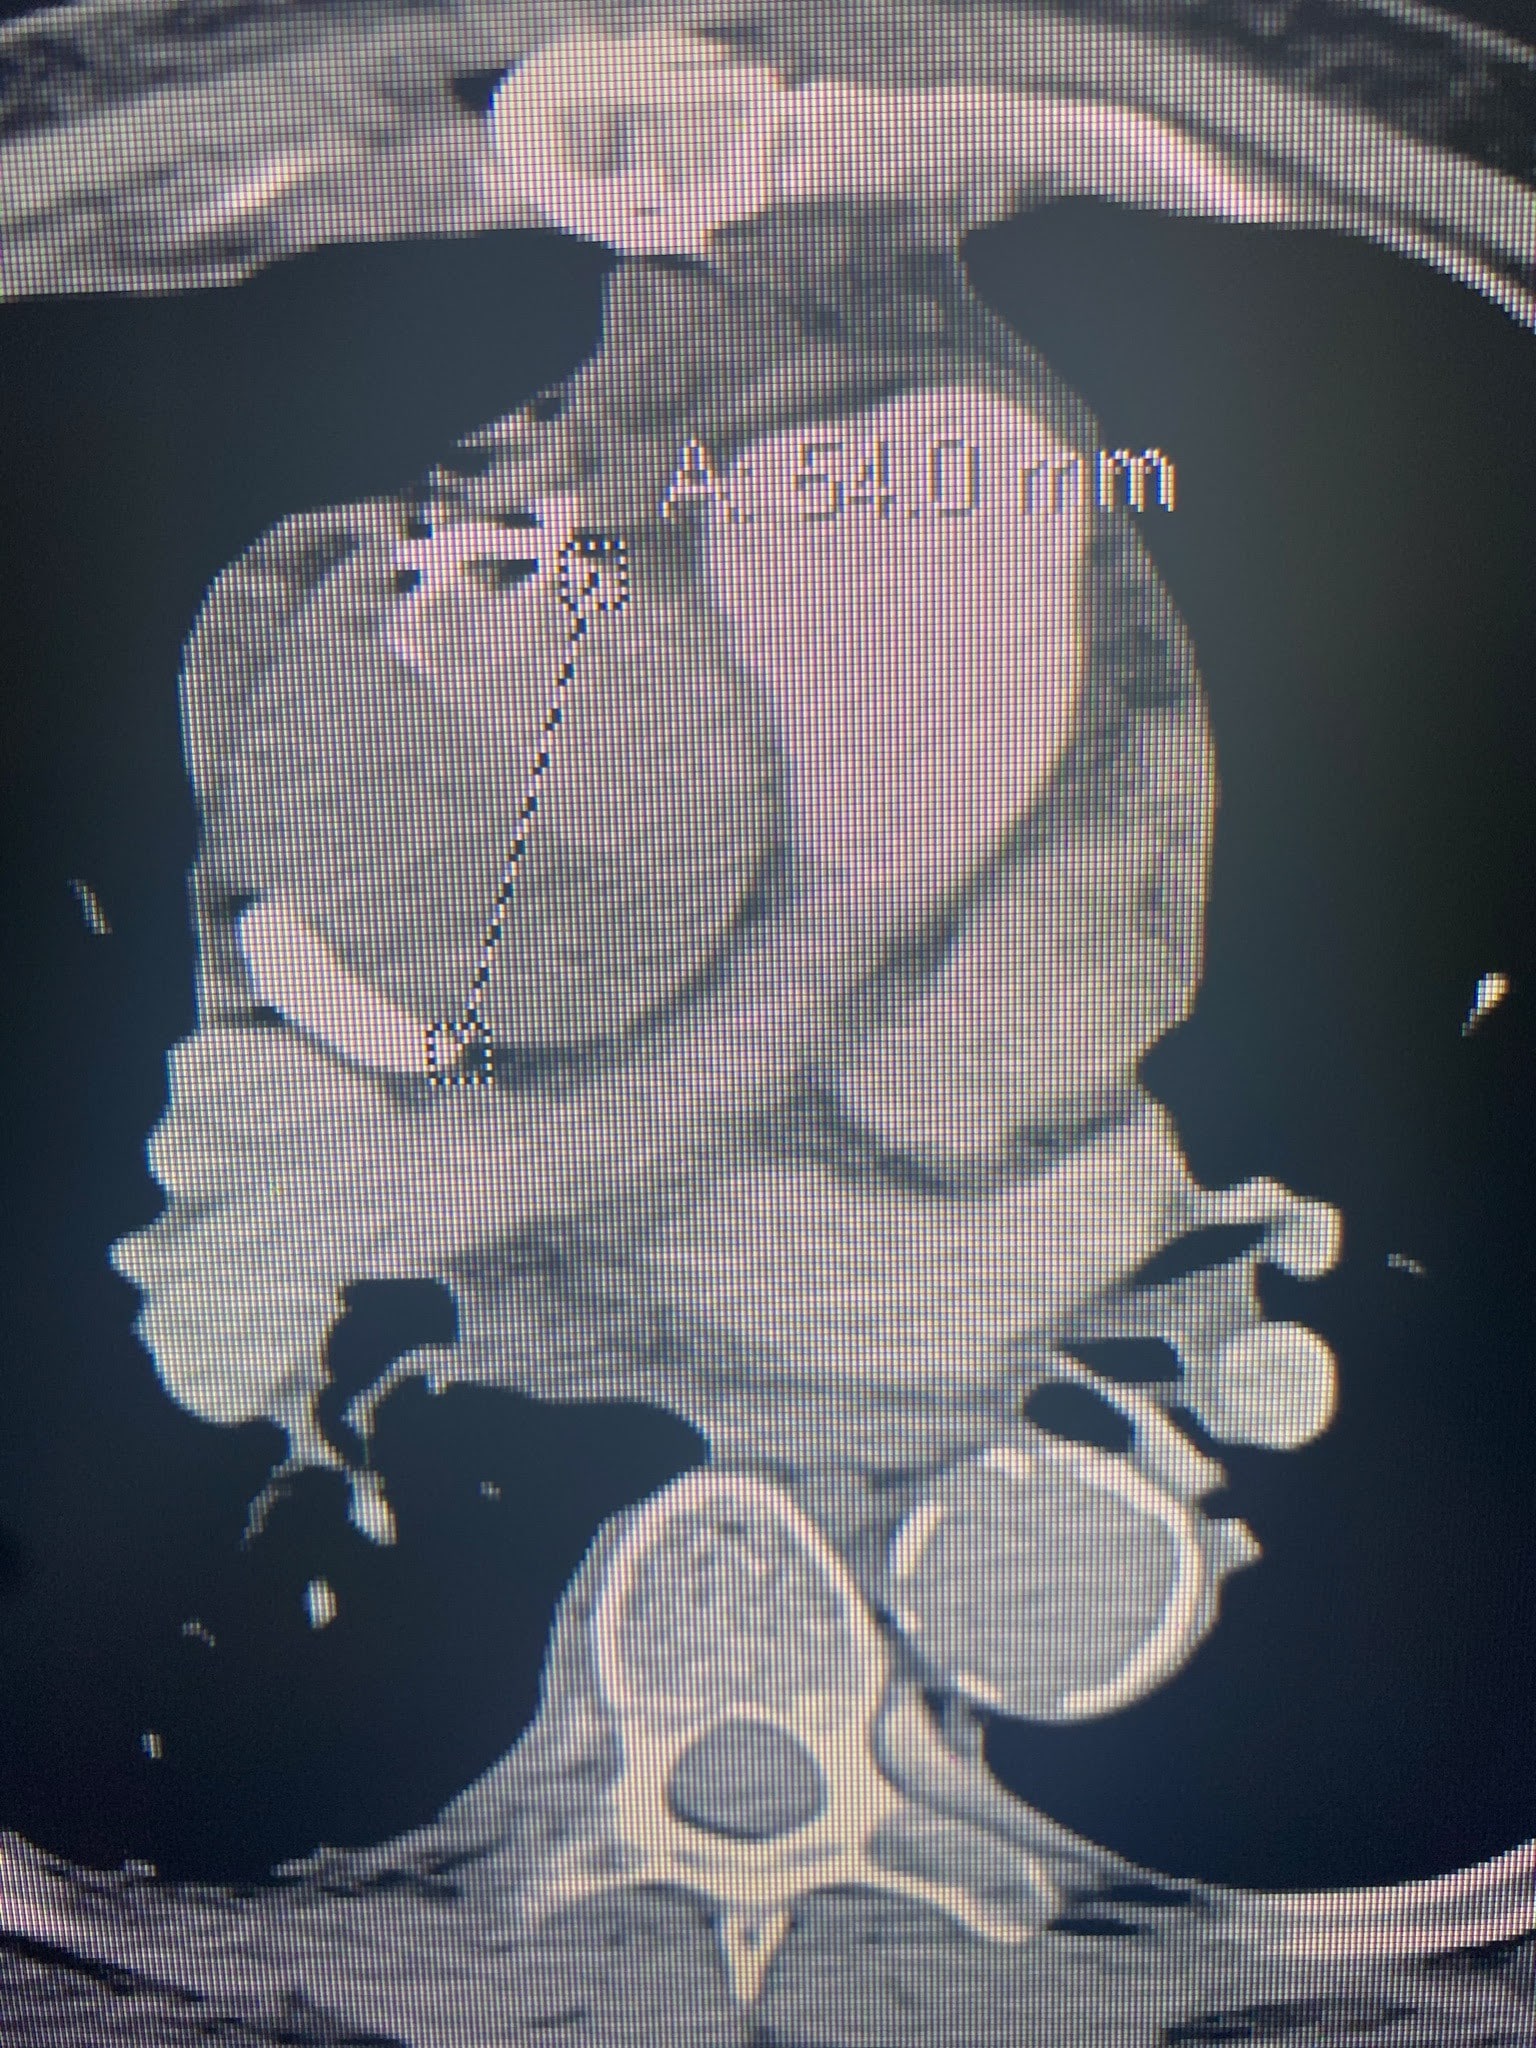 Altered Mental Status in a Patient with an Acute Aortic Dissection